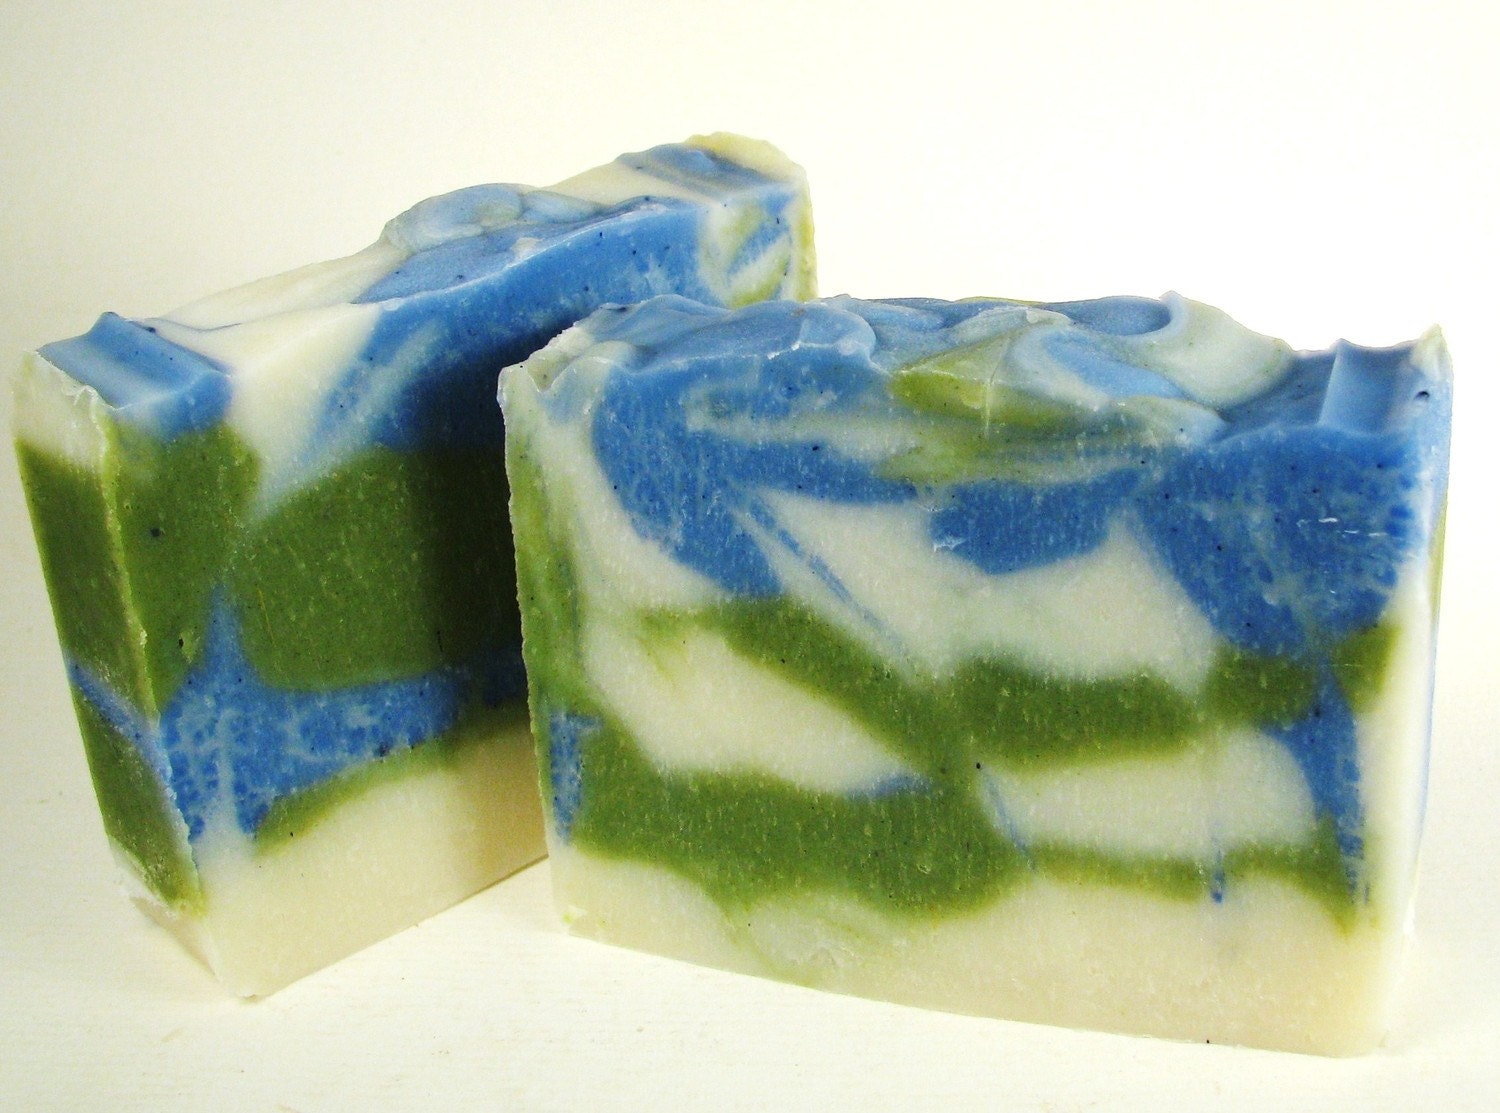 Bay Rum Cold Process Vegan Handcrafted Soap